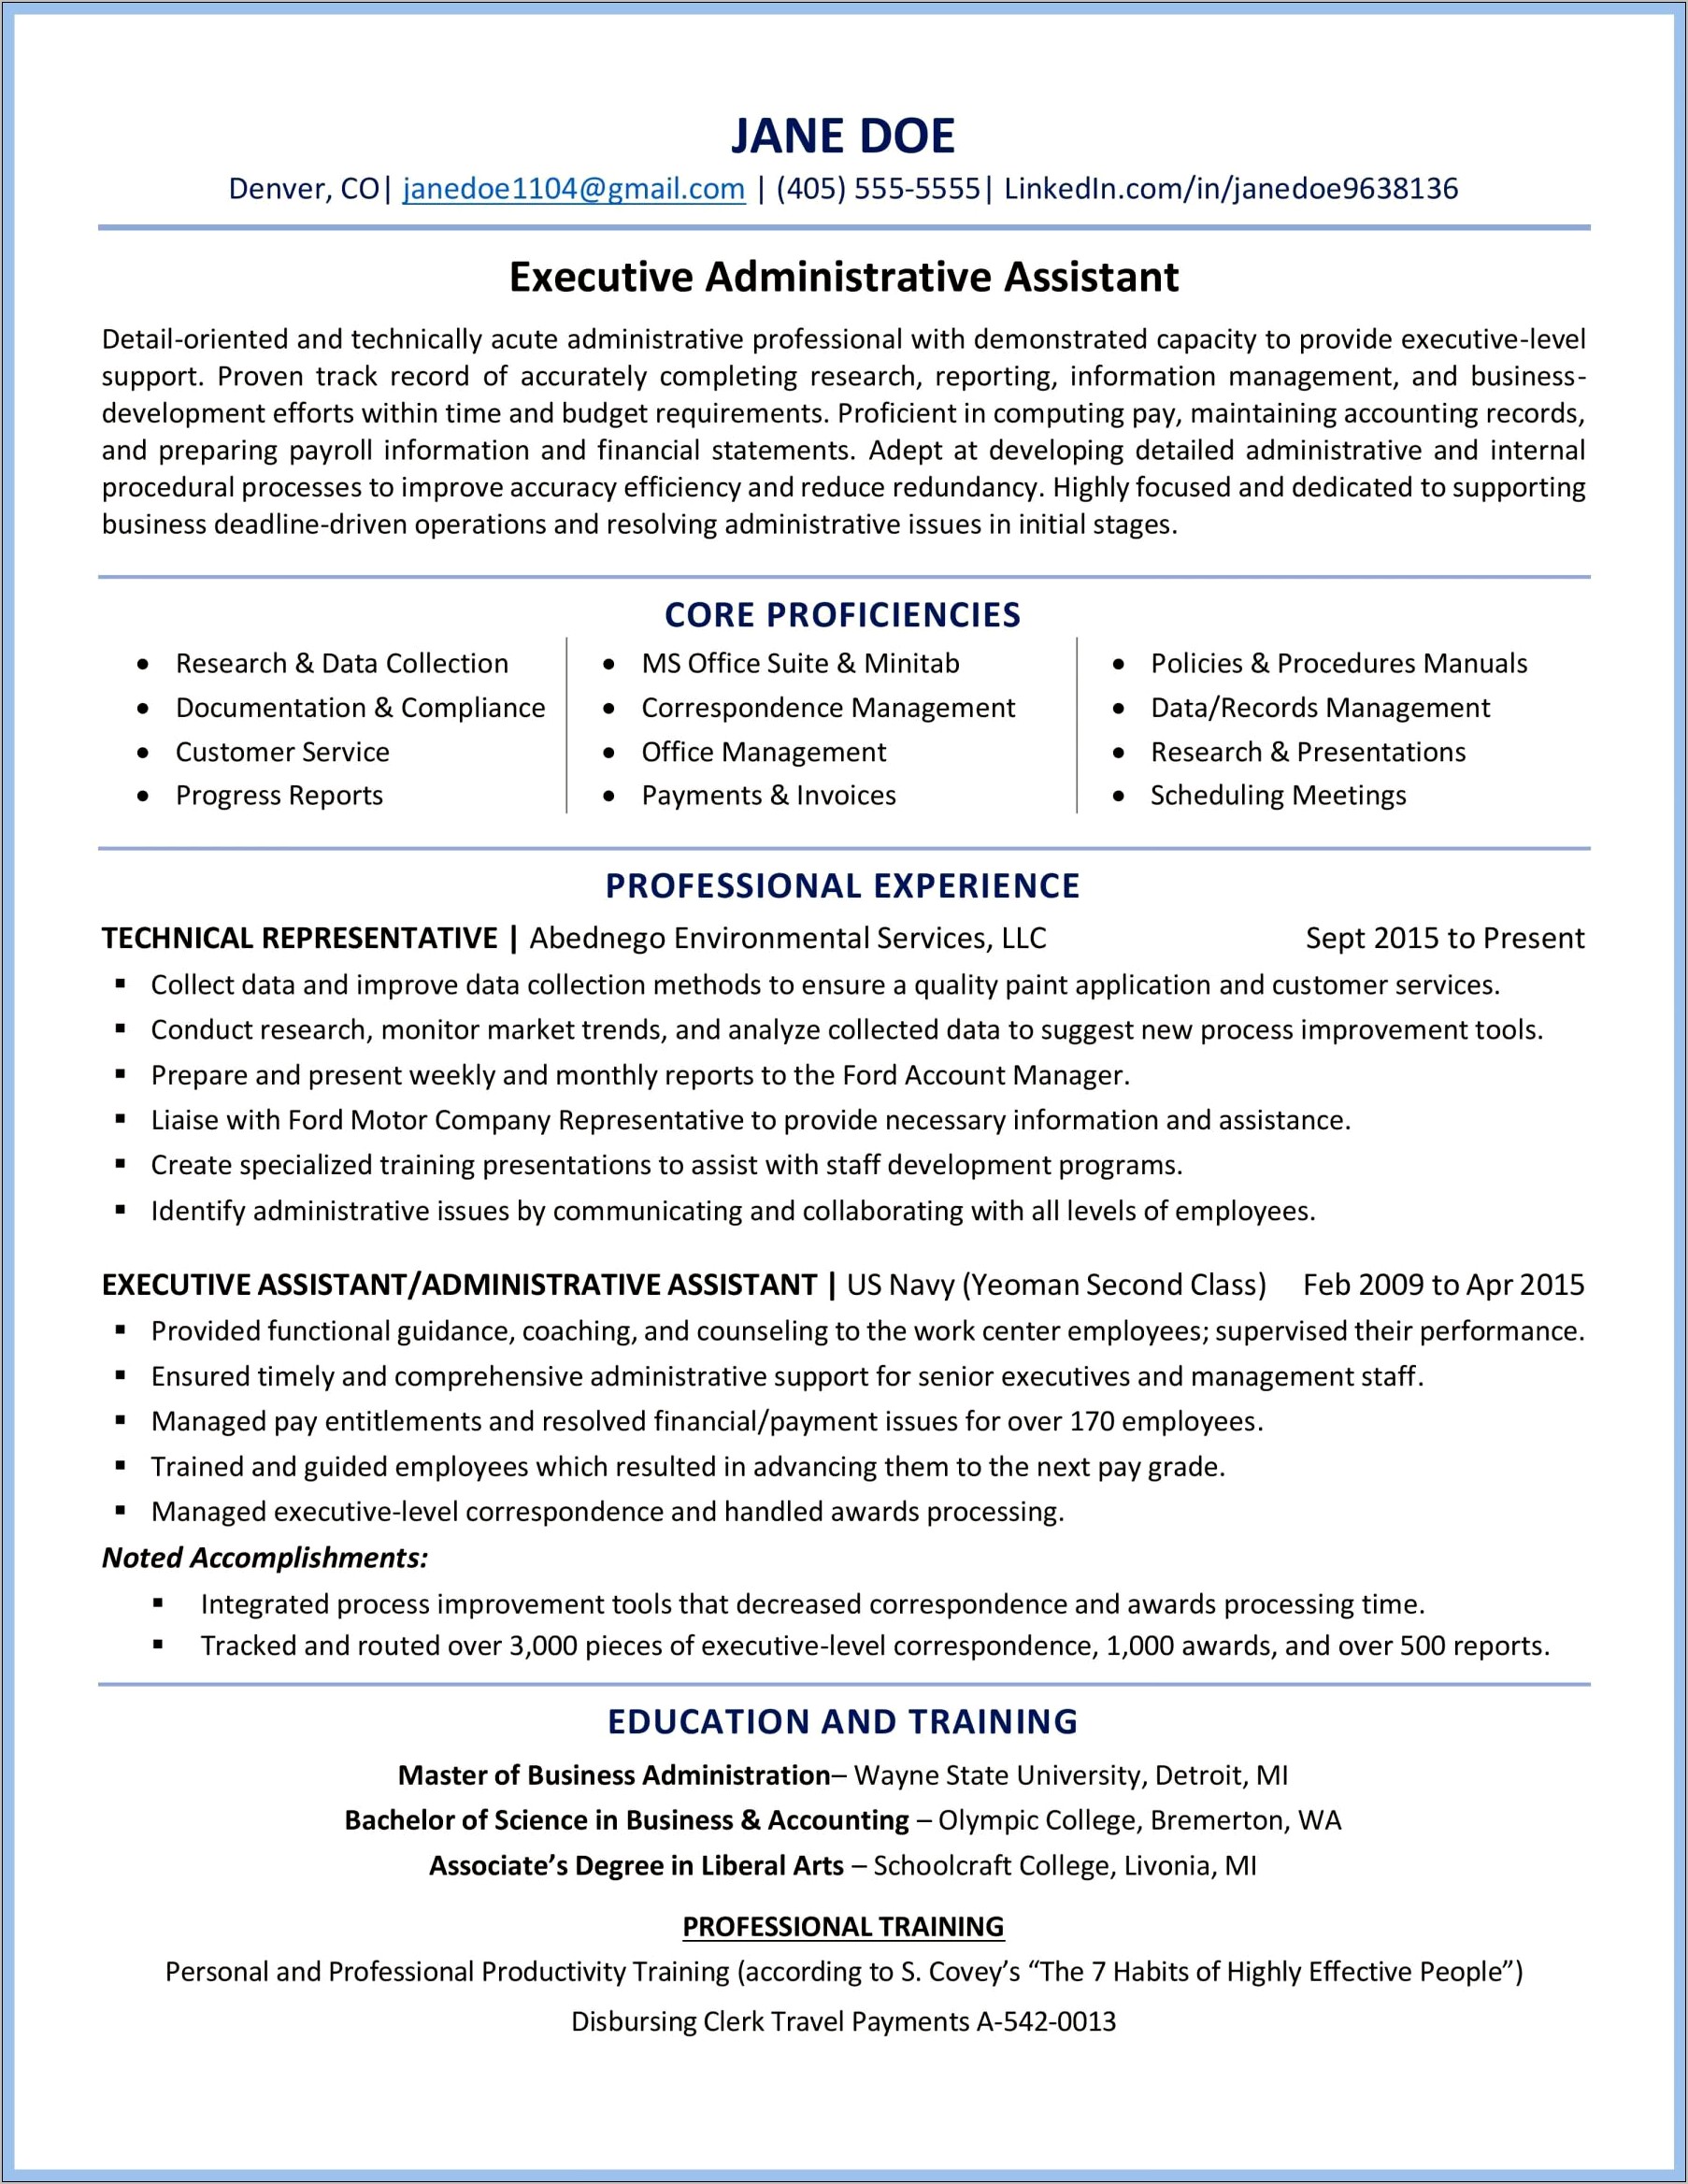 Examples Of A Functional Resume For Administrative Assistant